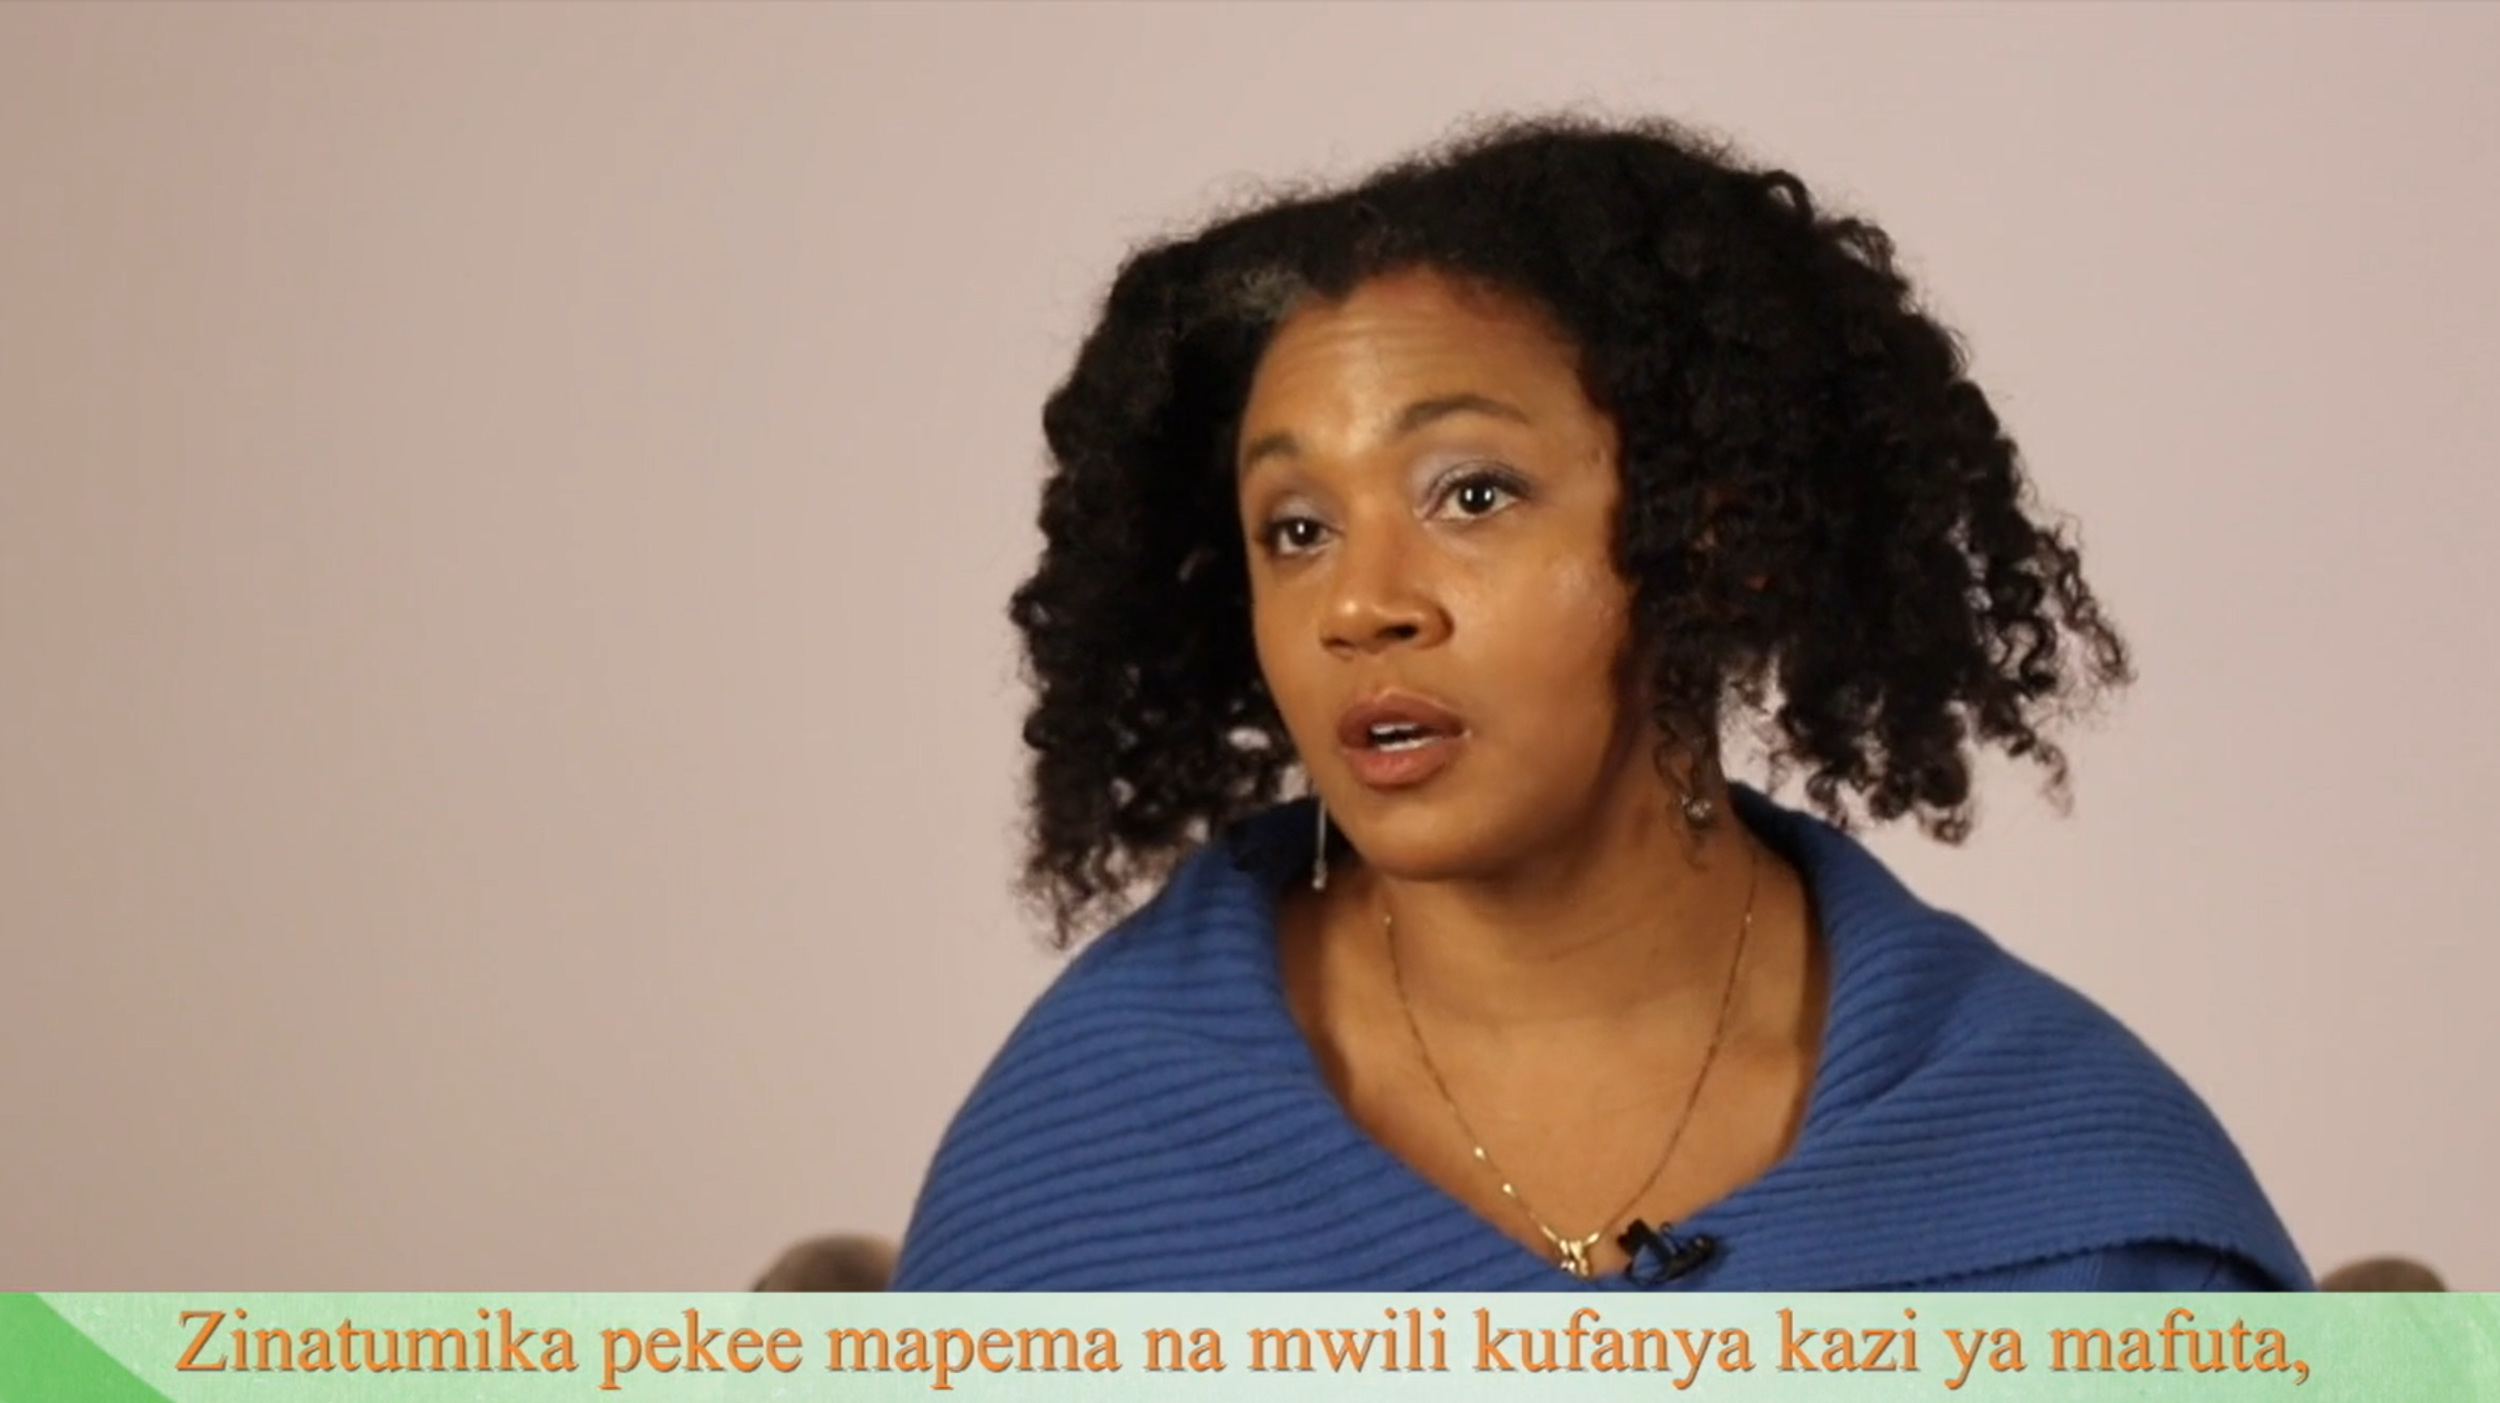 an African American woman with Swahili captions